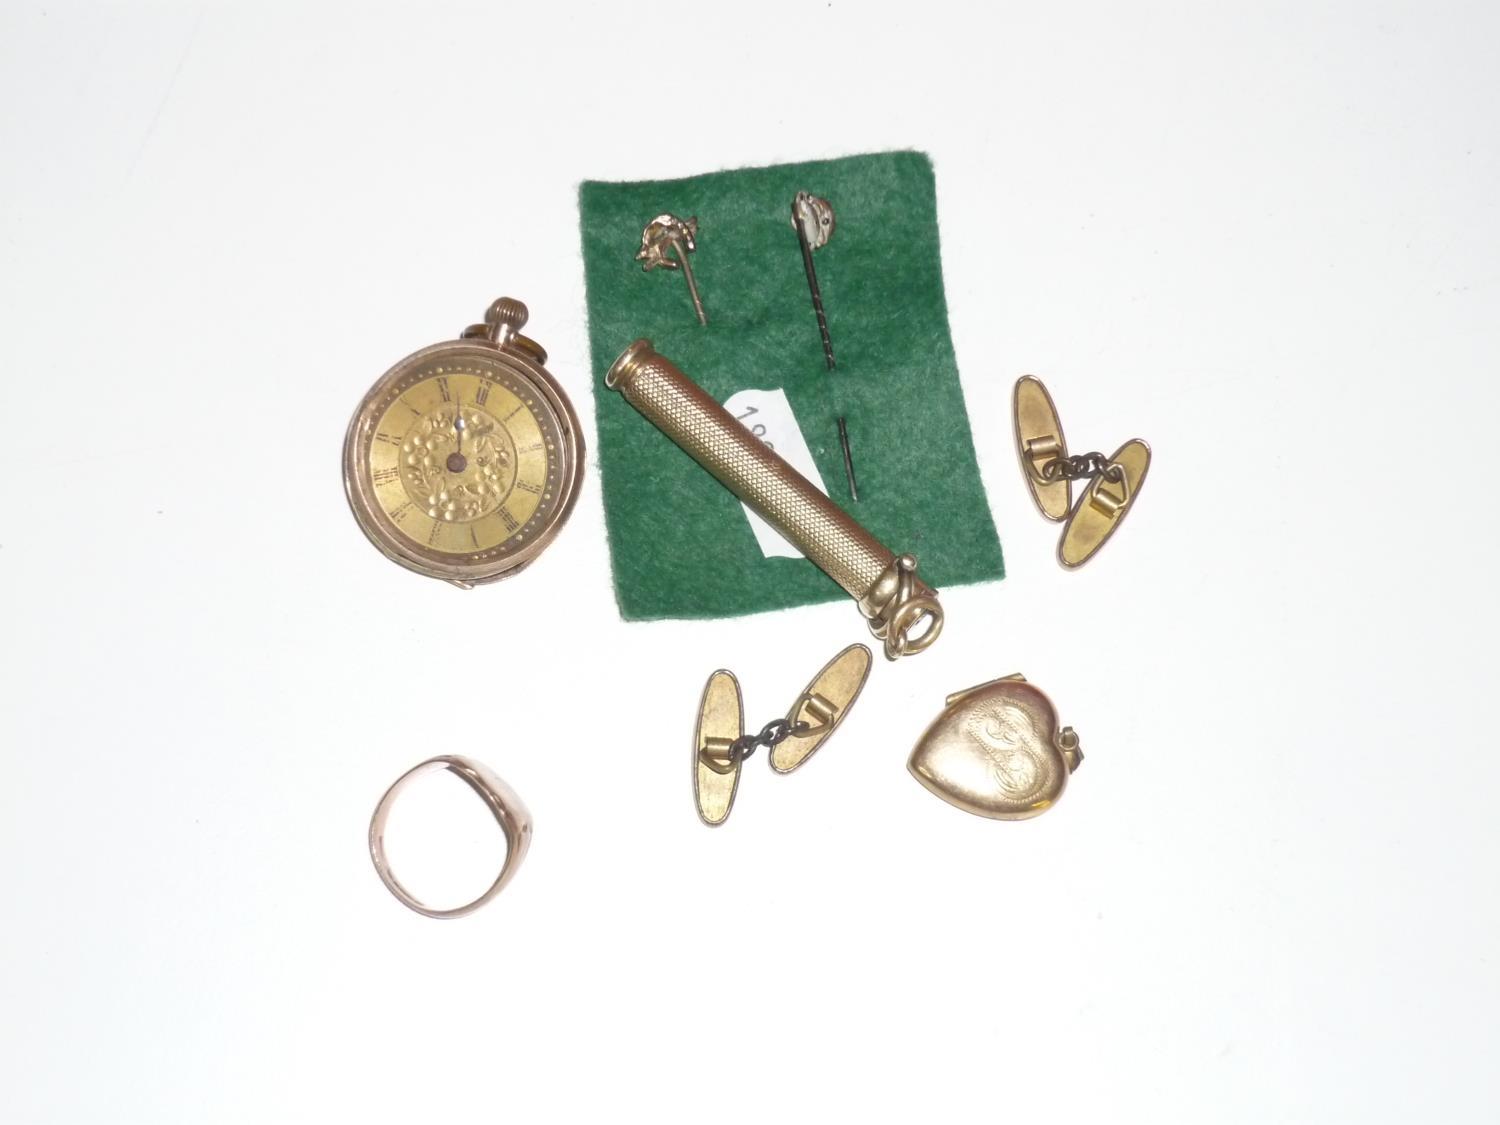 Pair of gilt metal cufflinks, a gents 9ct gold signet ring, two stock pins, a repelling pencil in